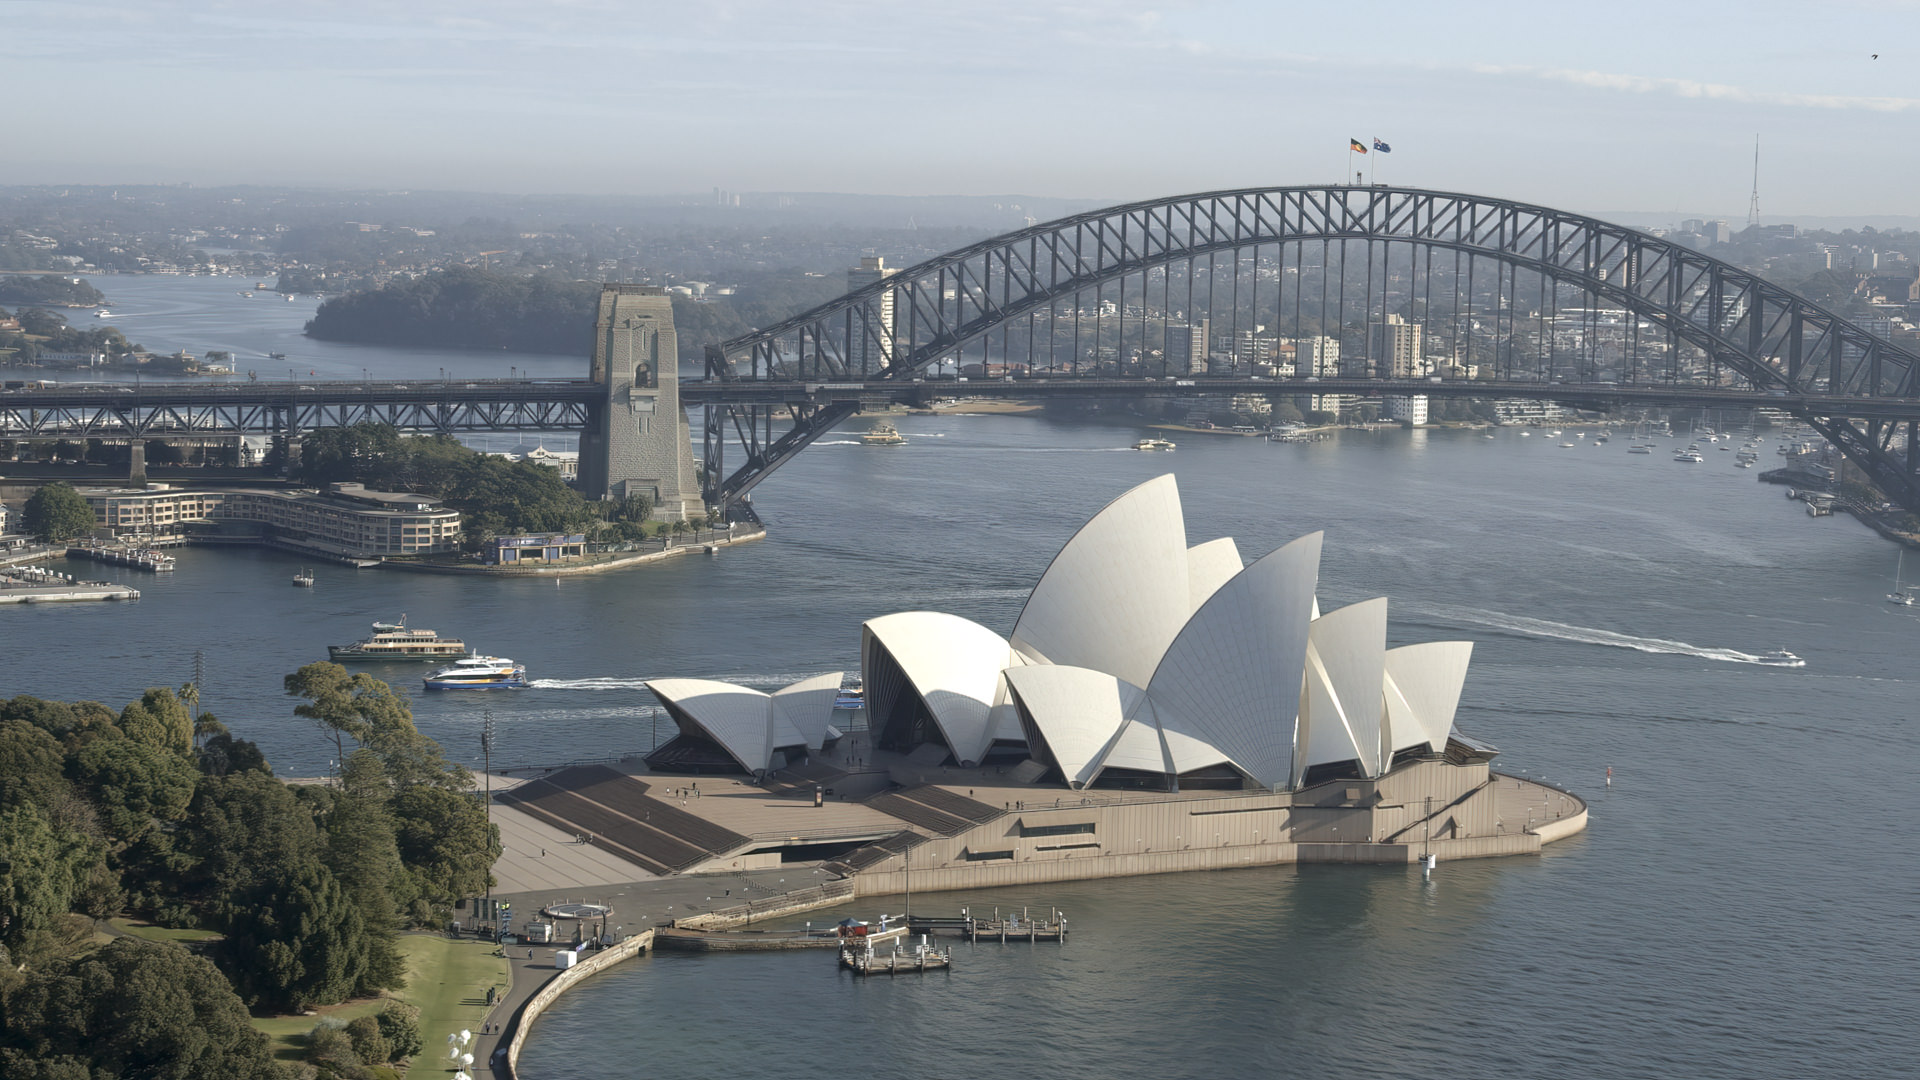 Capture the Essence of Sydney with 4K and Full HD Videos